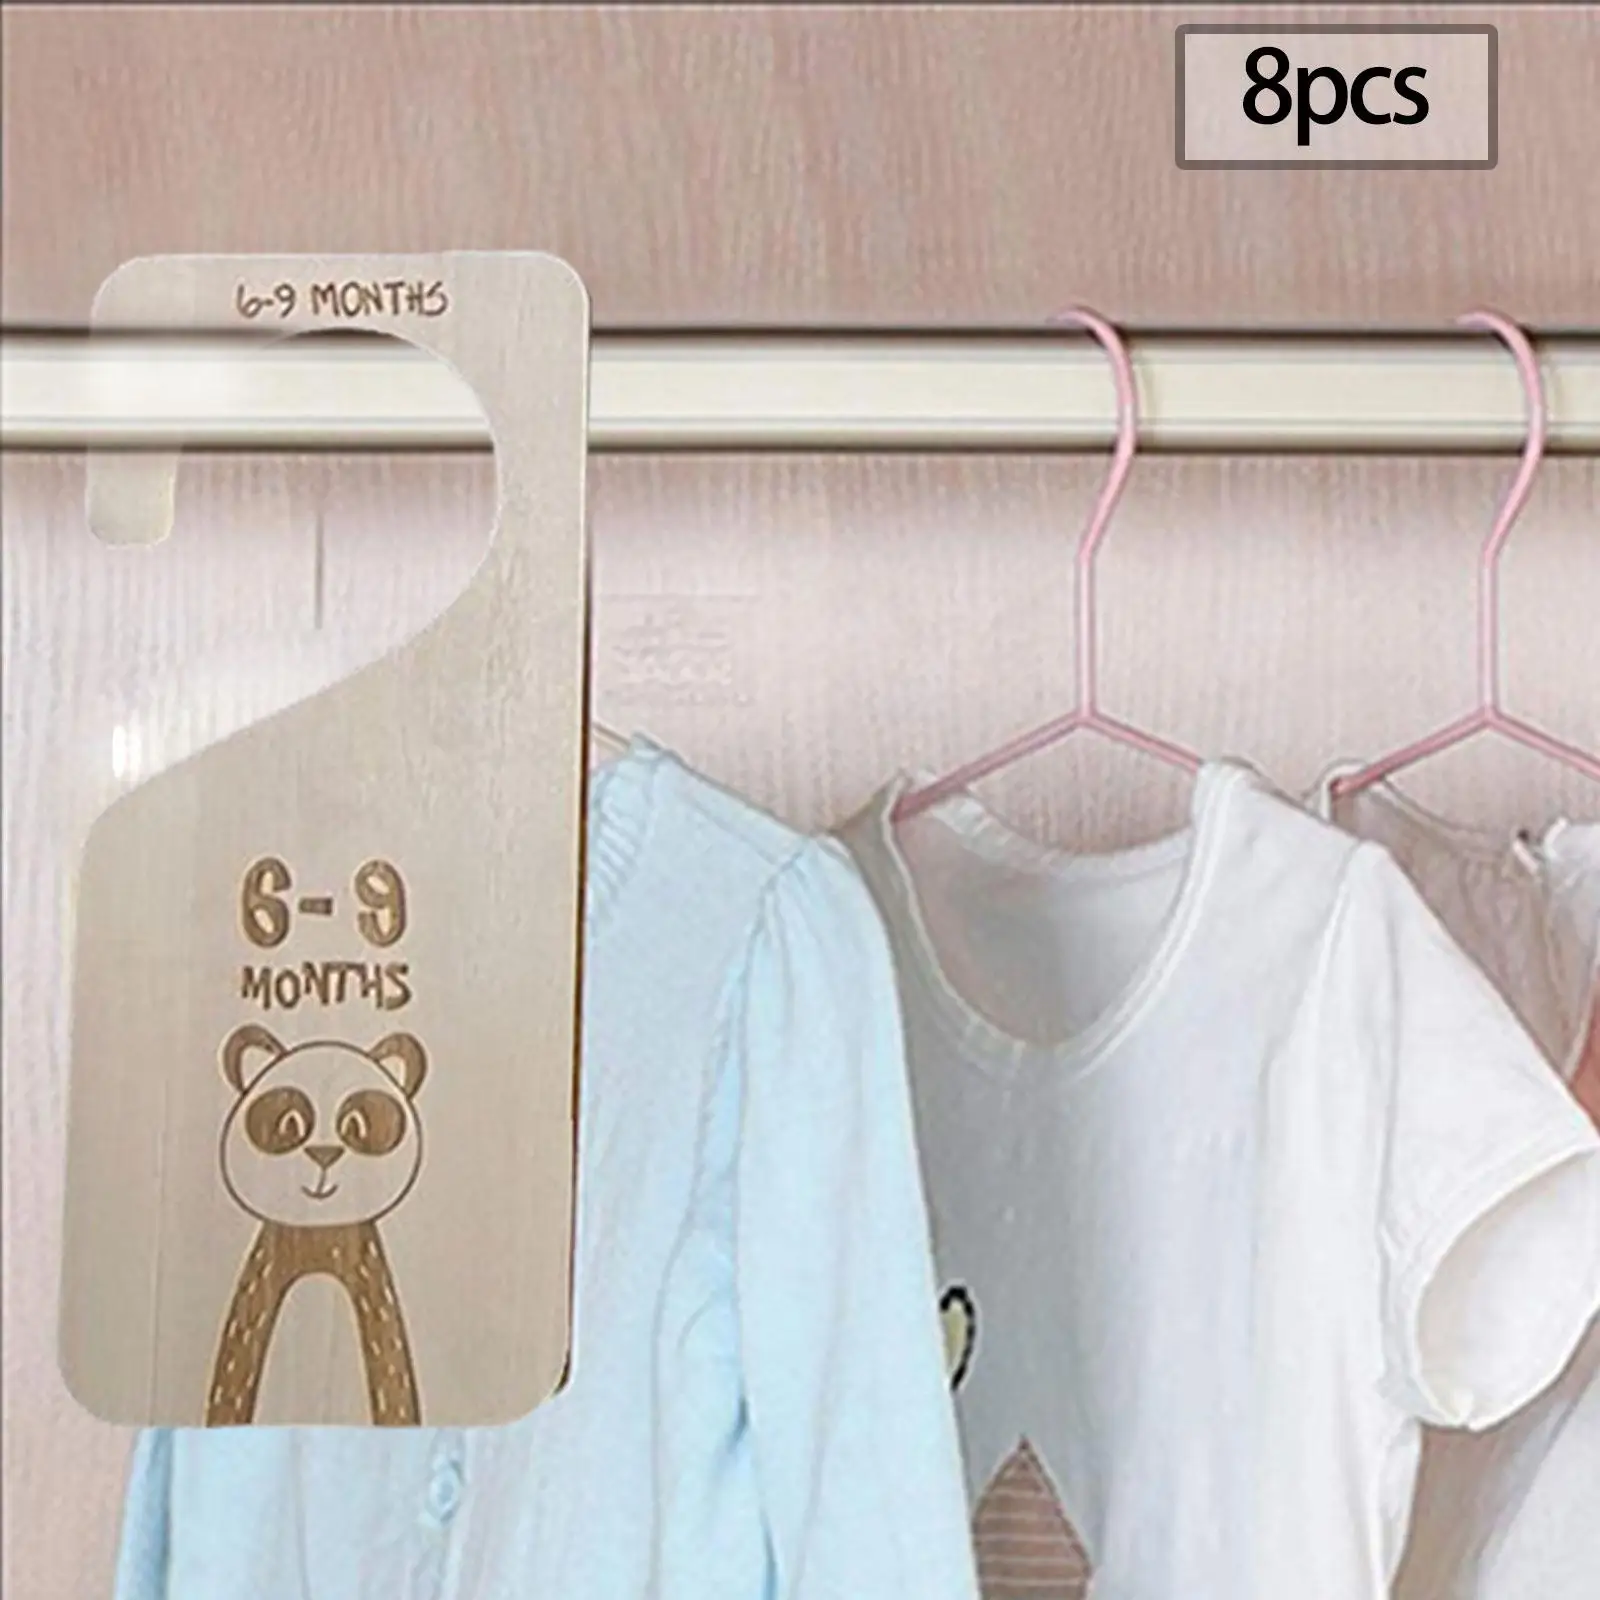 7Pcs Baby Closet Dividers Organizer Infant Wardrobe Divider Label Closet Baby Size Dividers for Daily Use Bedroom New Mom Gift